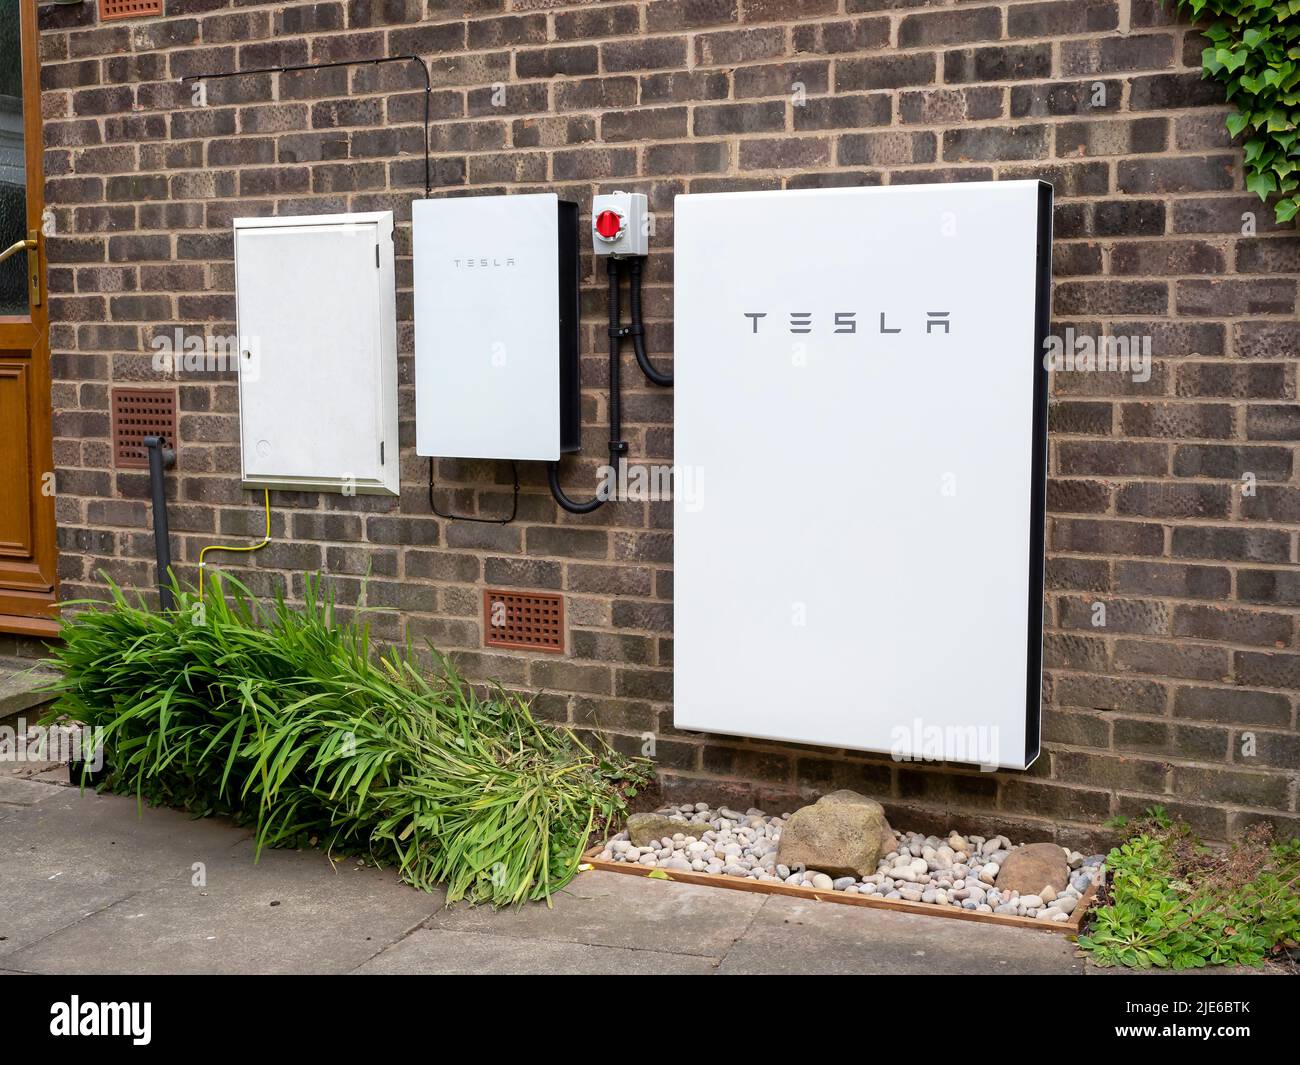 Tesla Powerwall 2 and Backup Gateway 2 battery storage system installed on a brick house wall Stock Photo